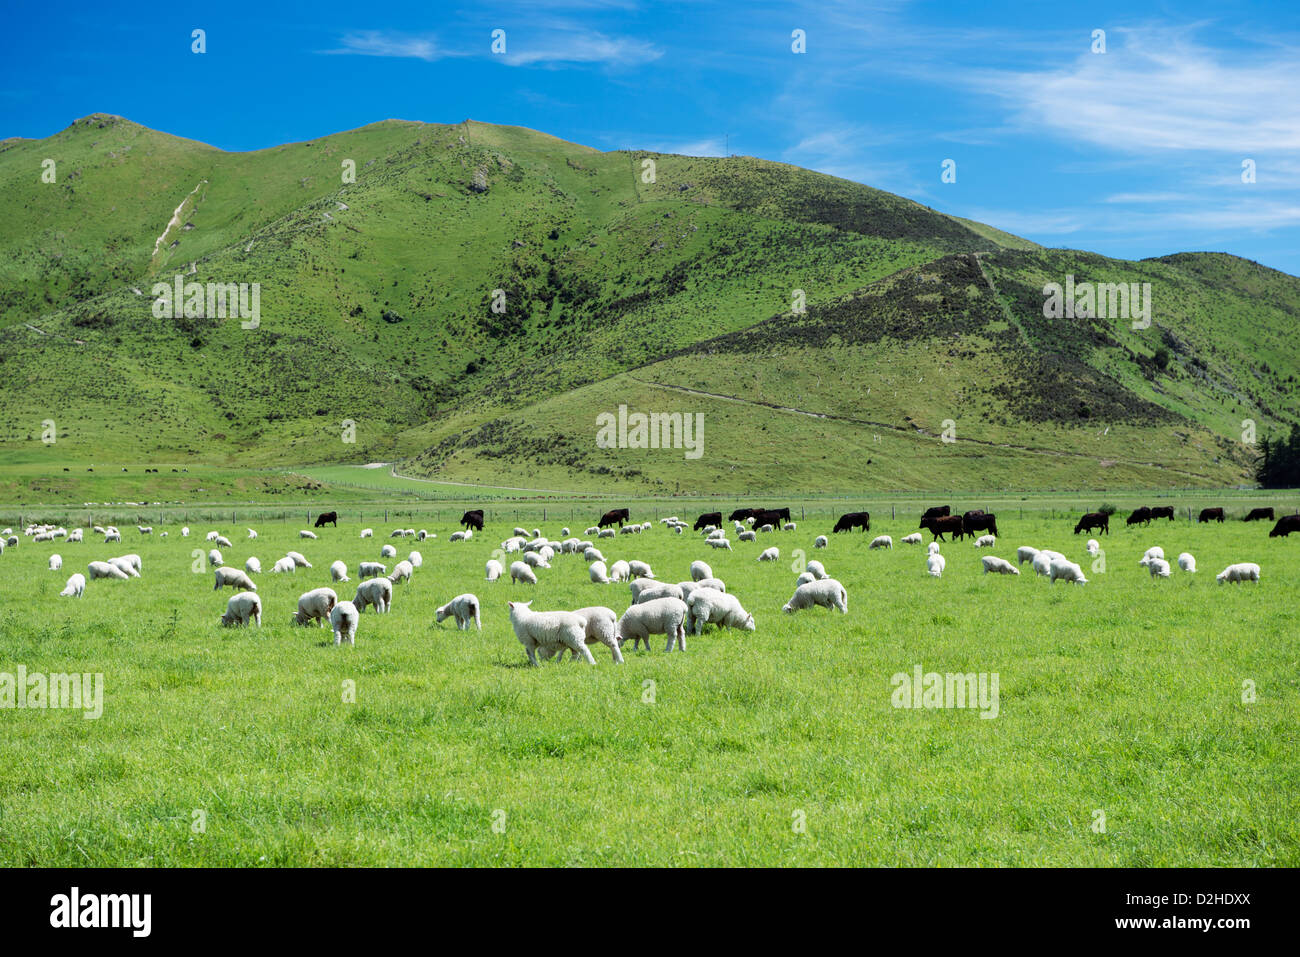 Sheep and cattle grazing together in a grassy green meadow Stock Photo